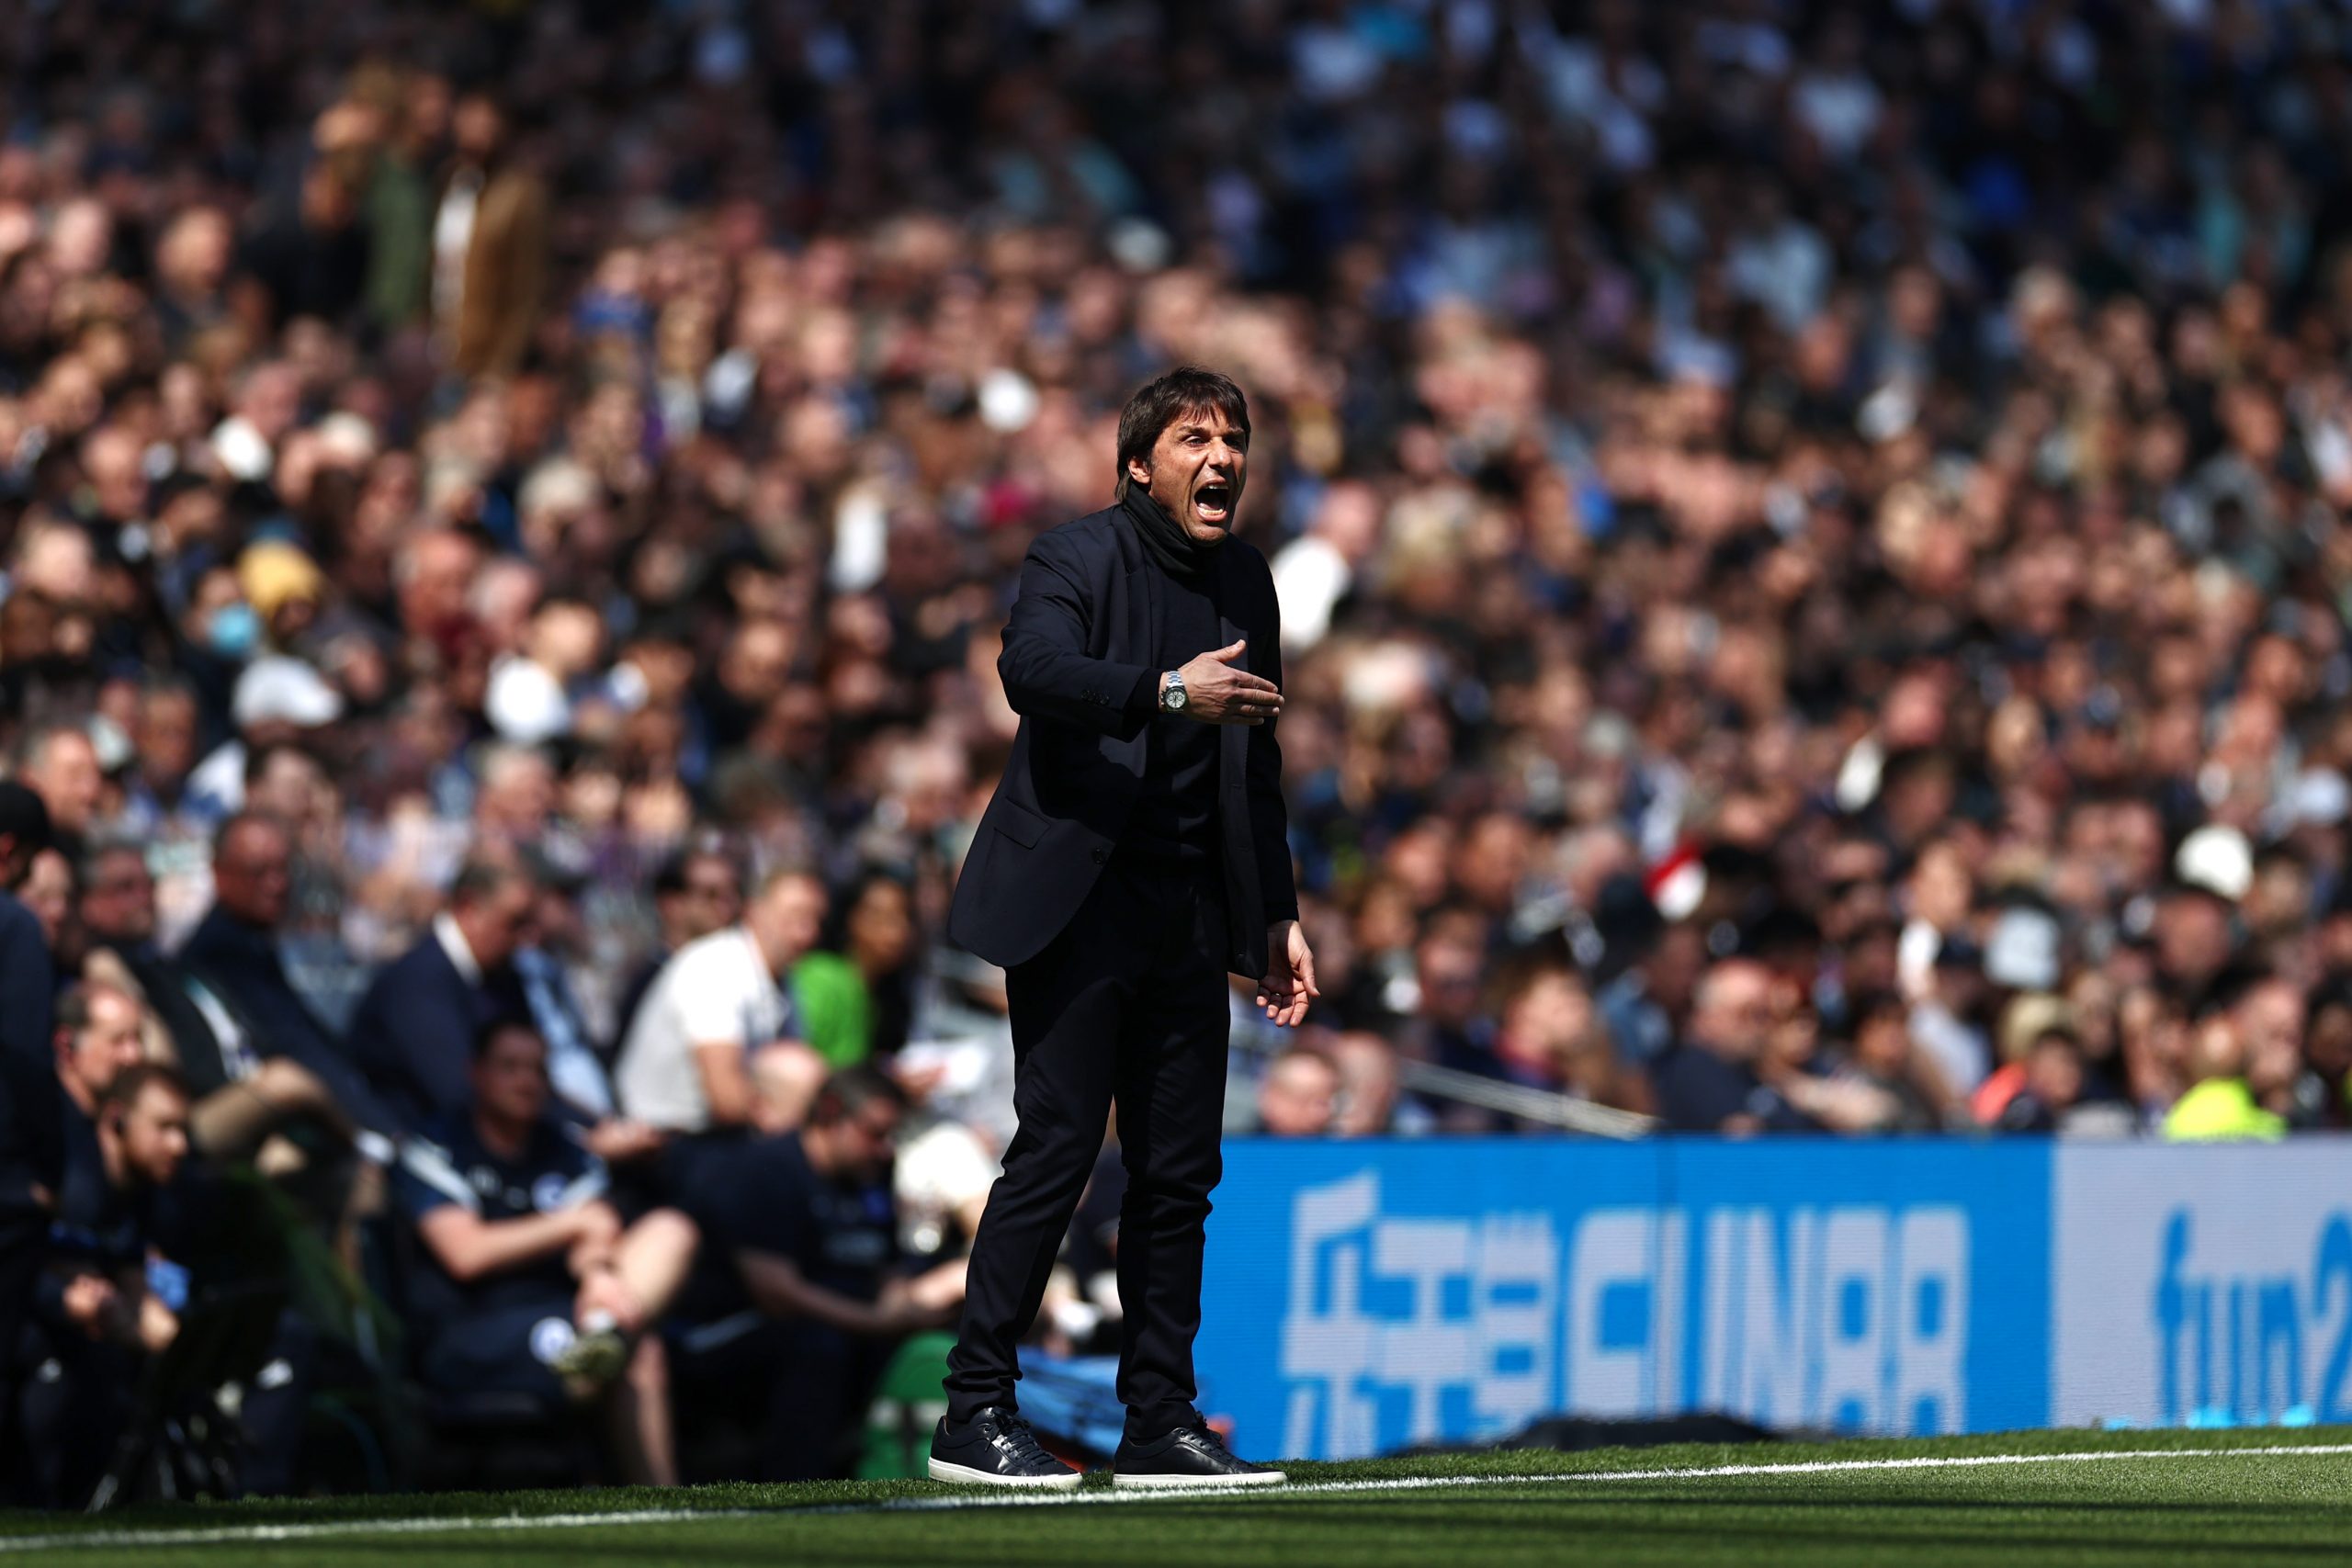 Antonio Conte dismisses links to PSG. (Photo by Ryan Pierse/Getty Images)